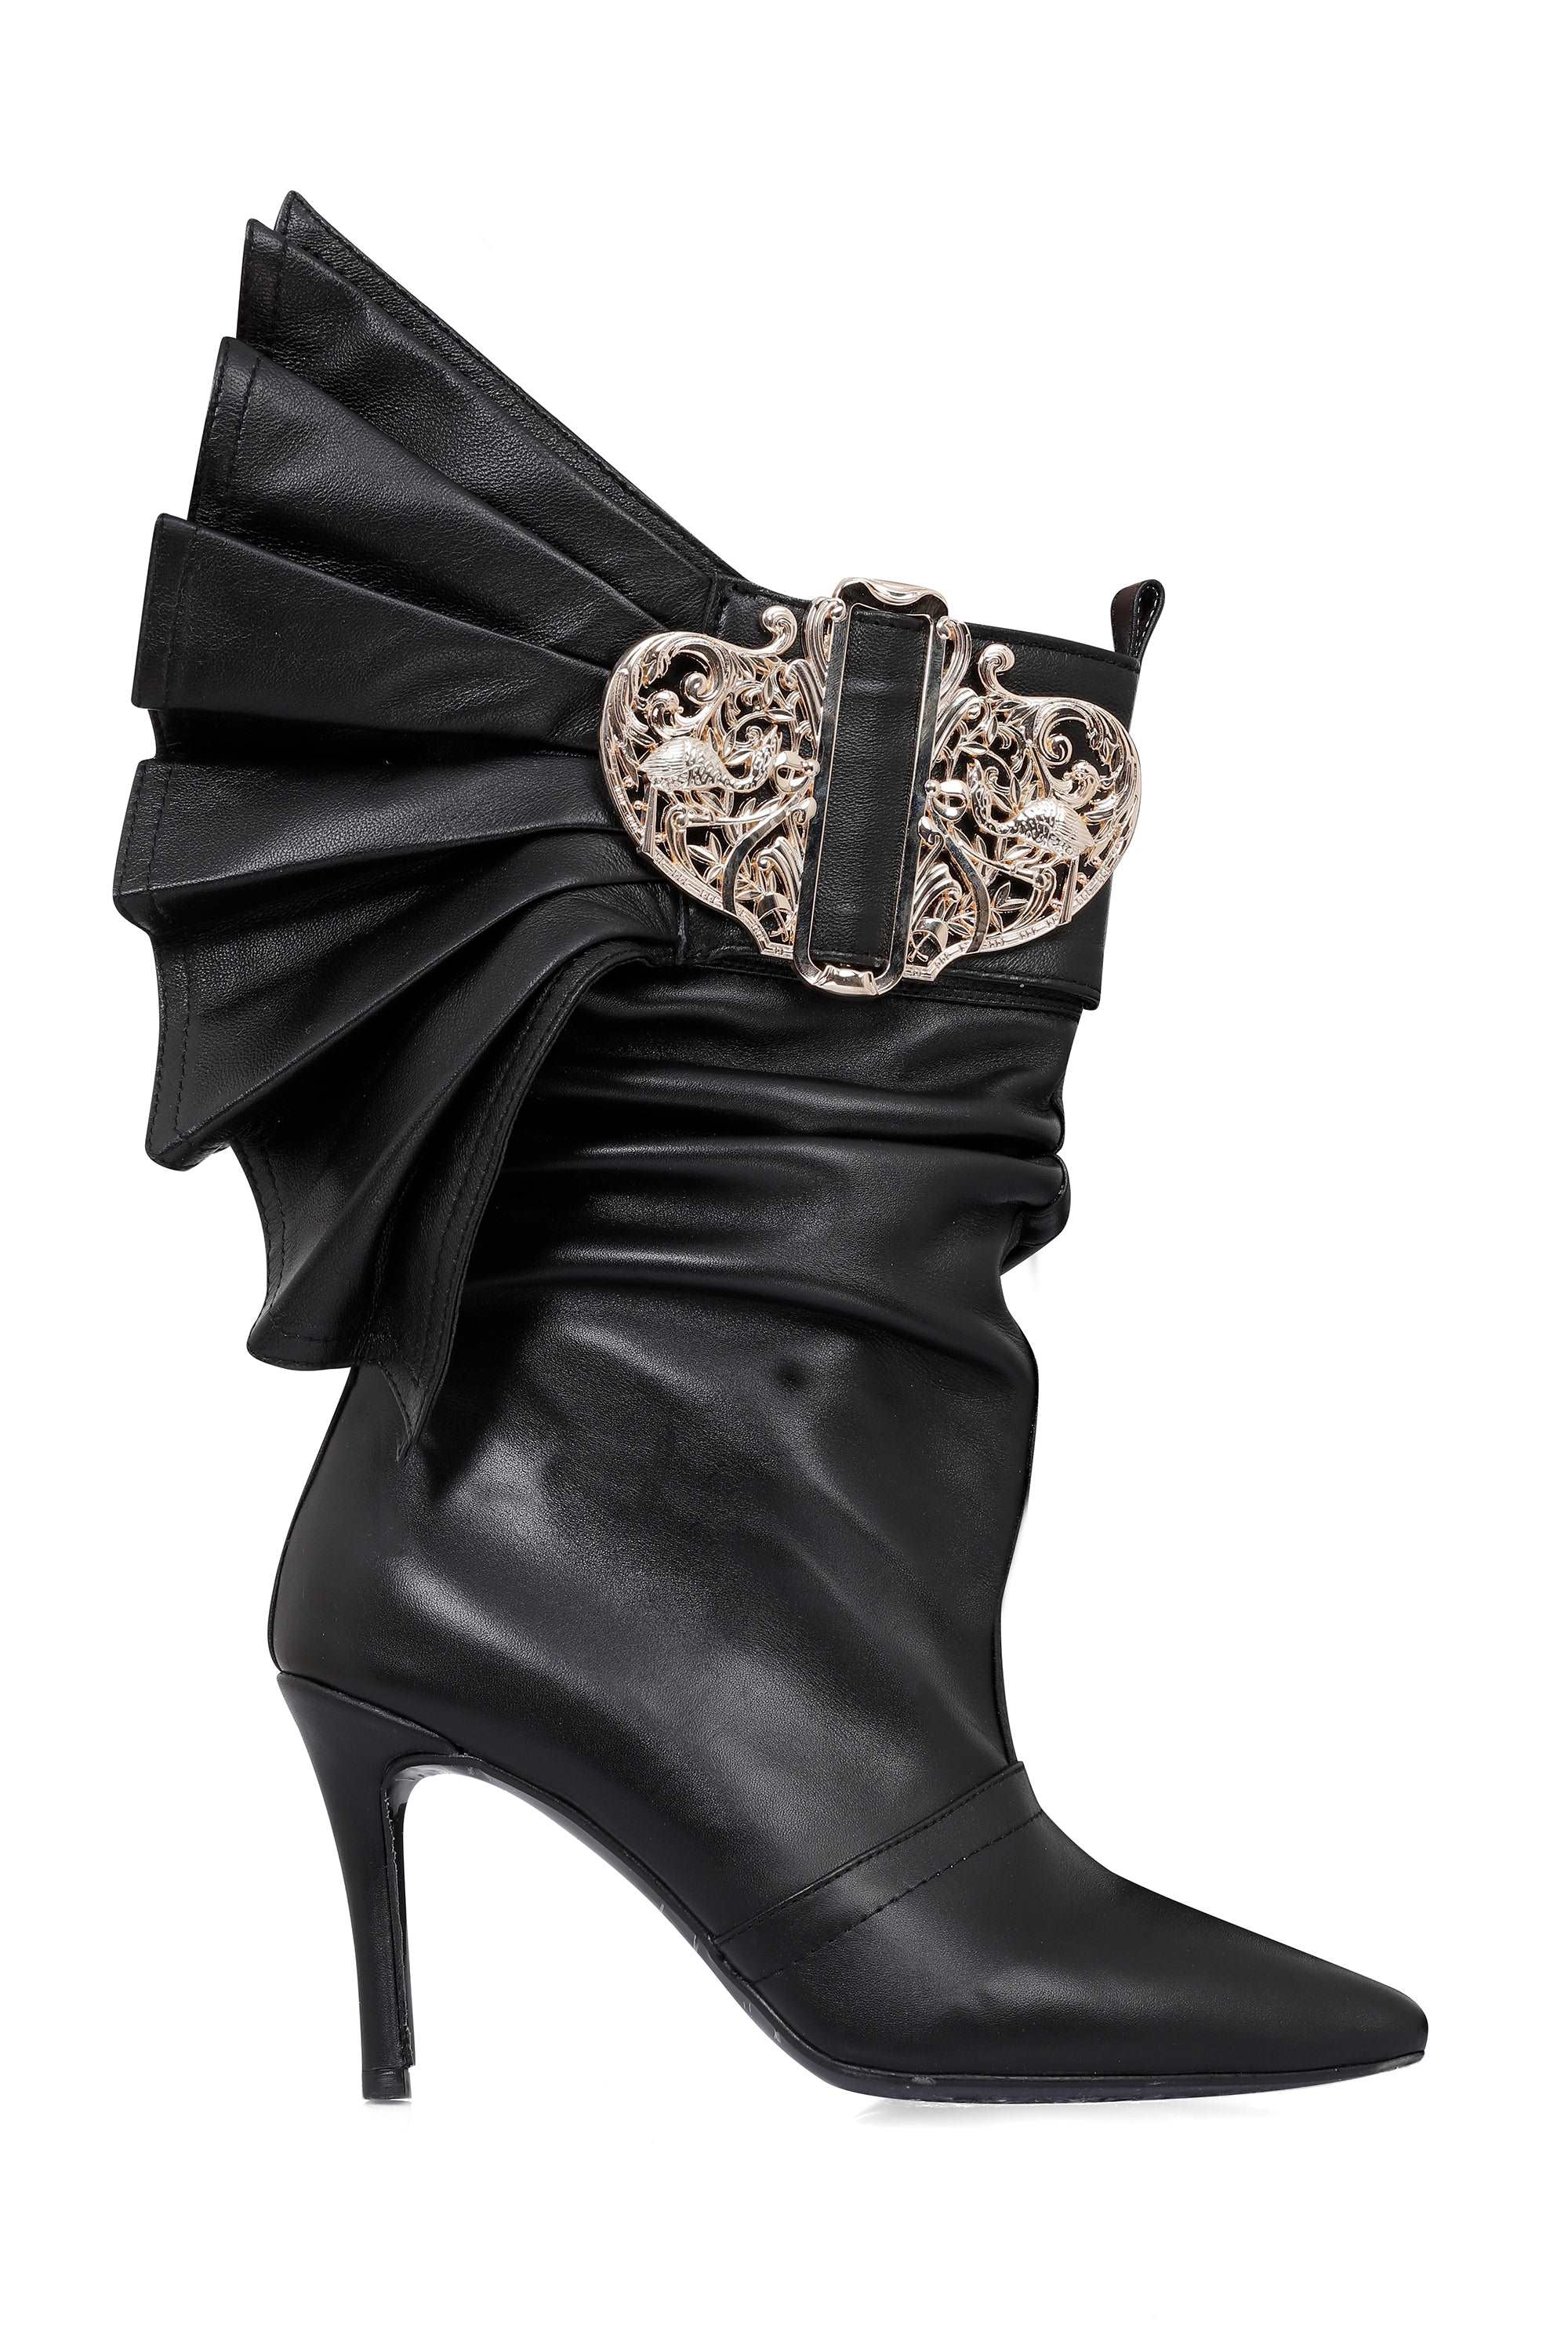 Baroque Buckled Leather Boots